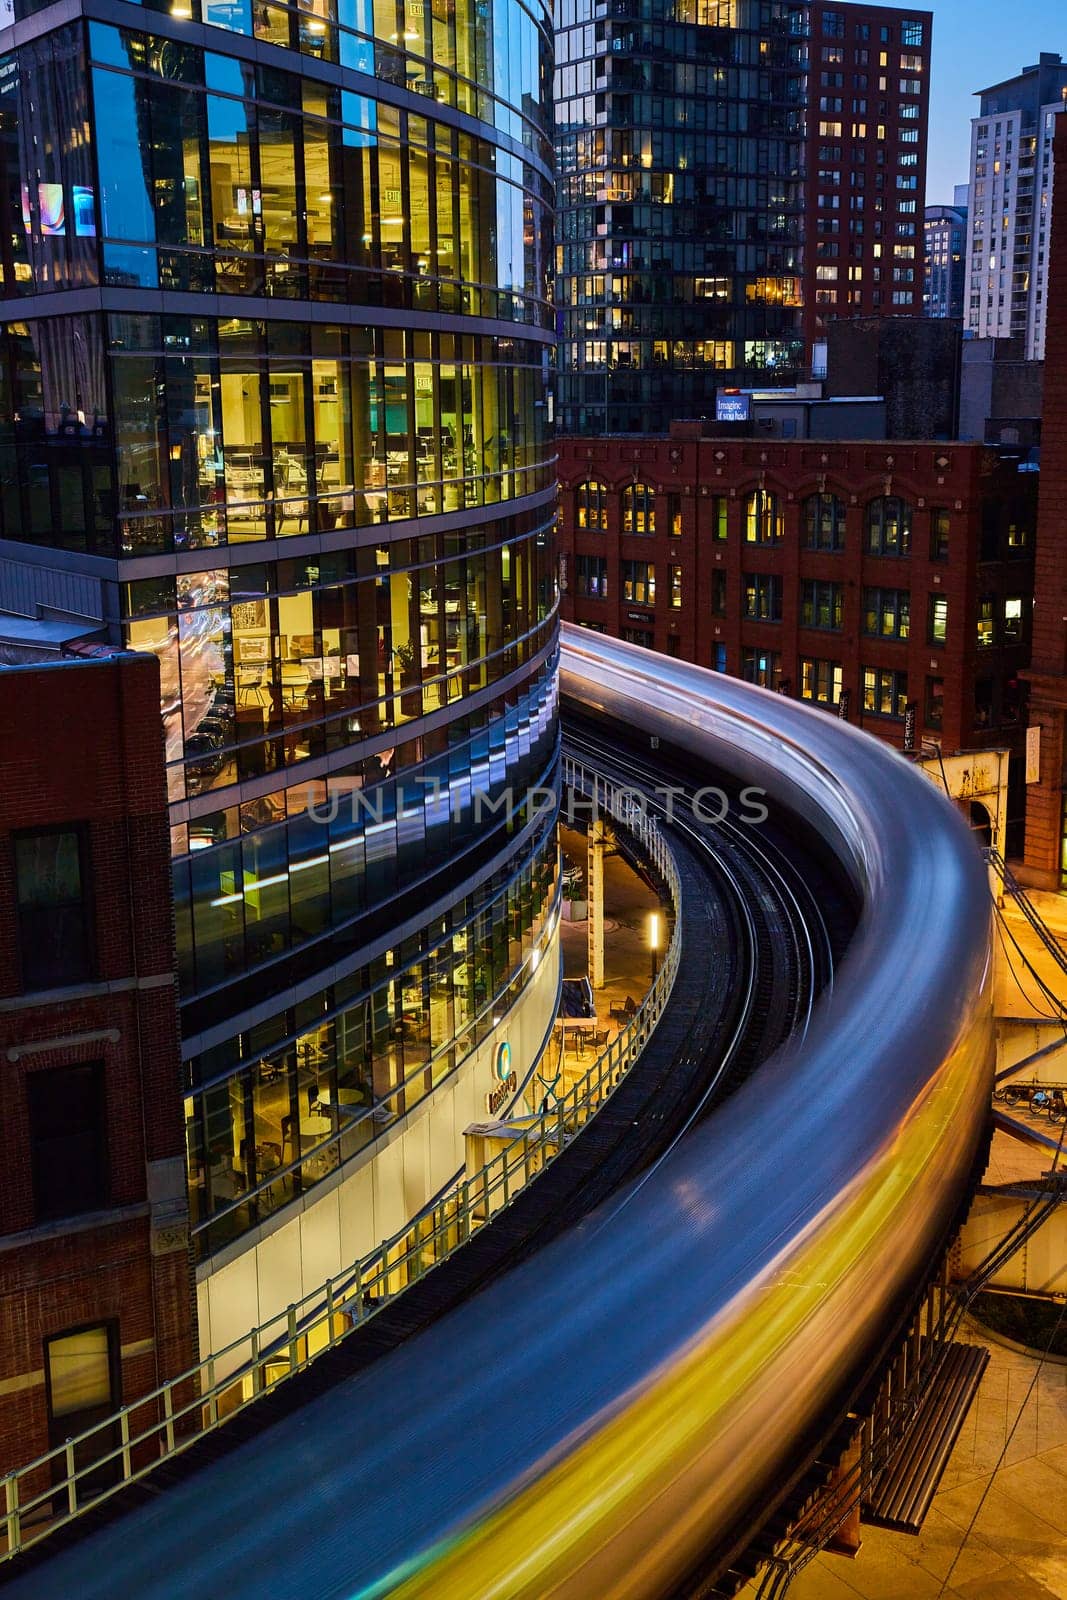 Evening Rush Hour in Chicago, 2023 - Blurred Train in Motion Amidst Modern and Historic Architecture